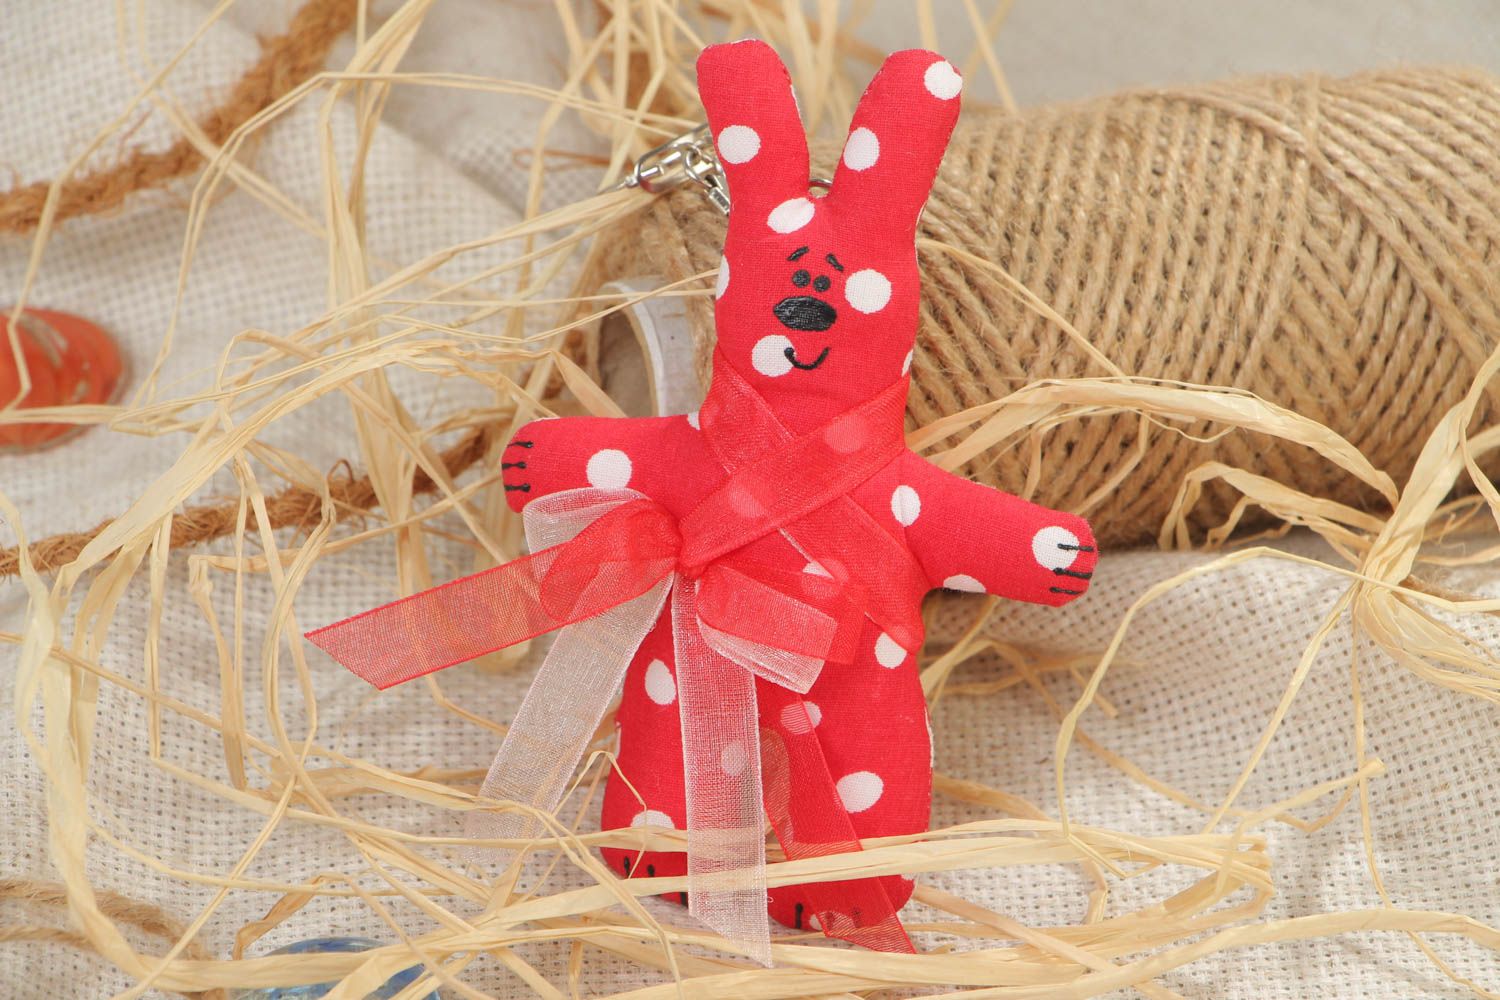 Handmade soft toy keychain sewn of cotton fabric in the shape of red rabbit photo 1